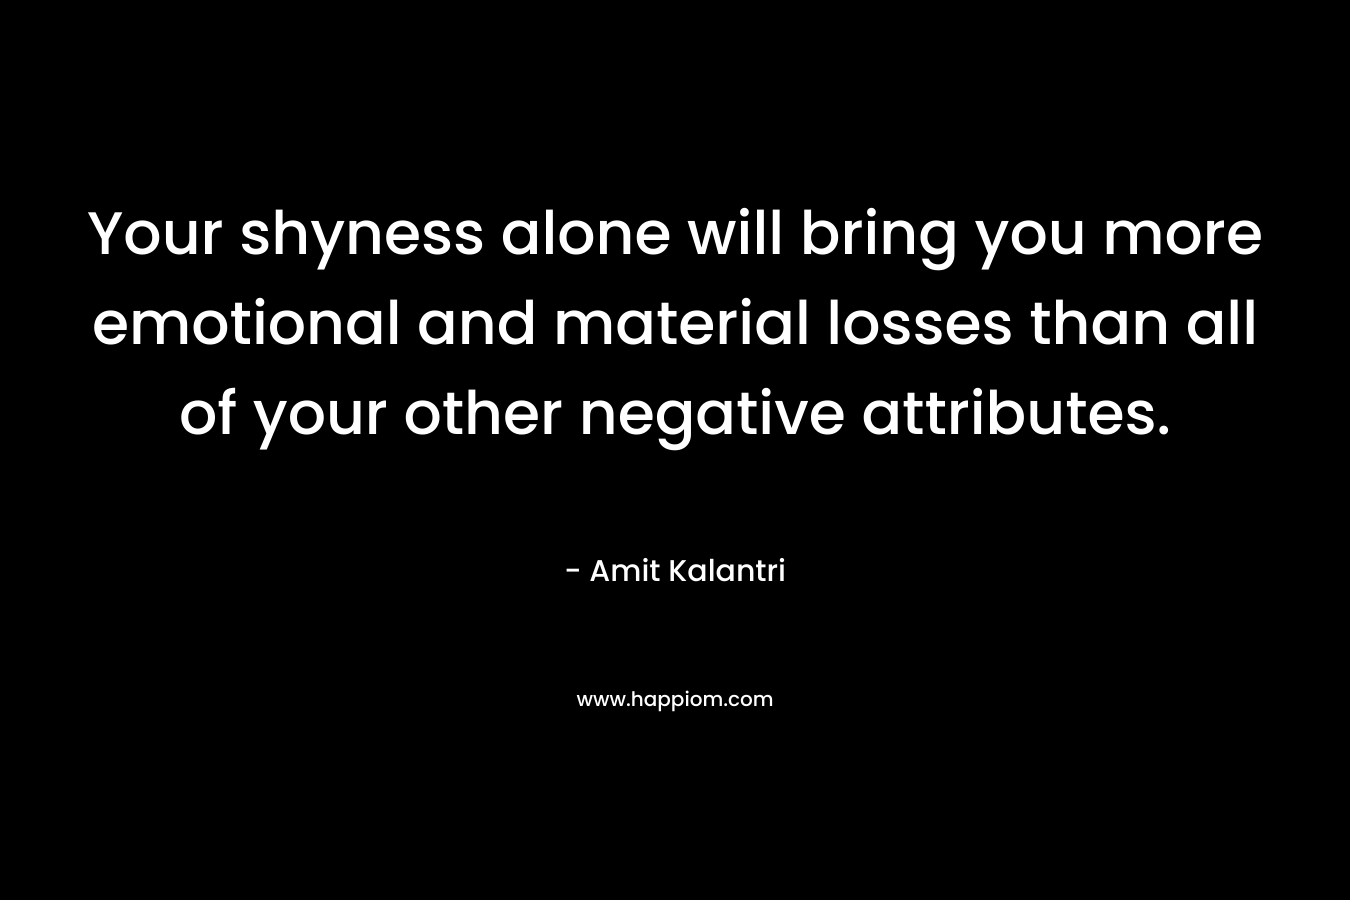 Your shyness alone will bring you more emotional and material losses than all of your other negative attributes. – Amit Kalantri